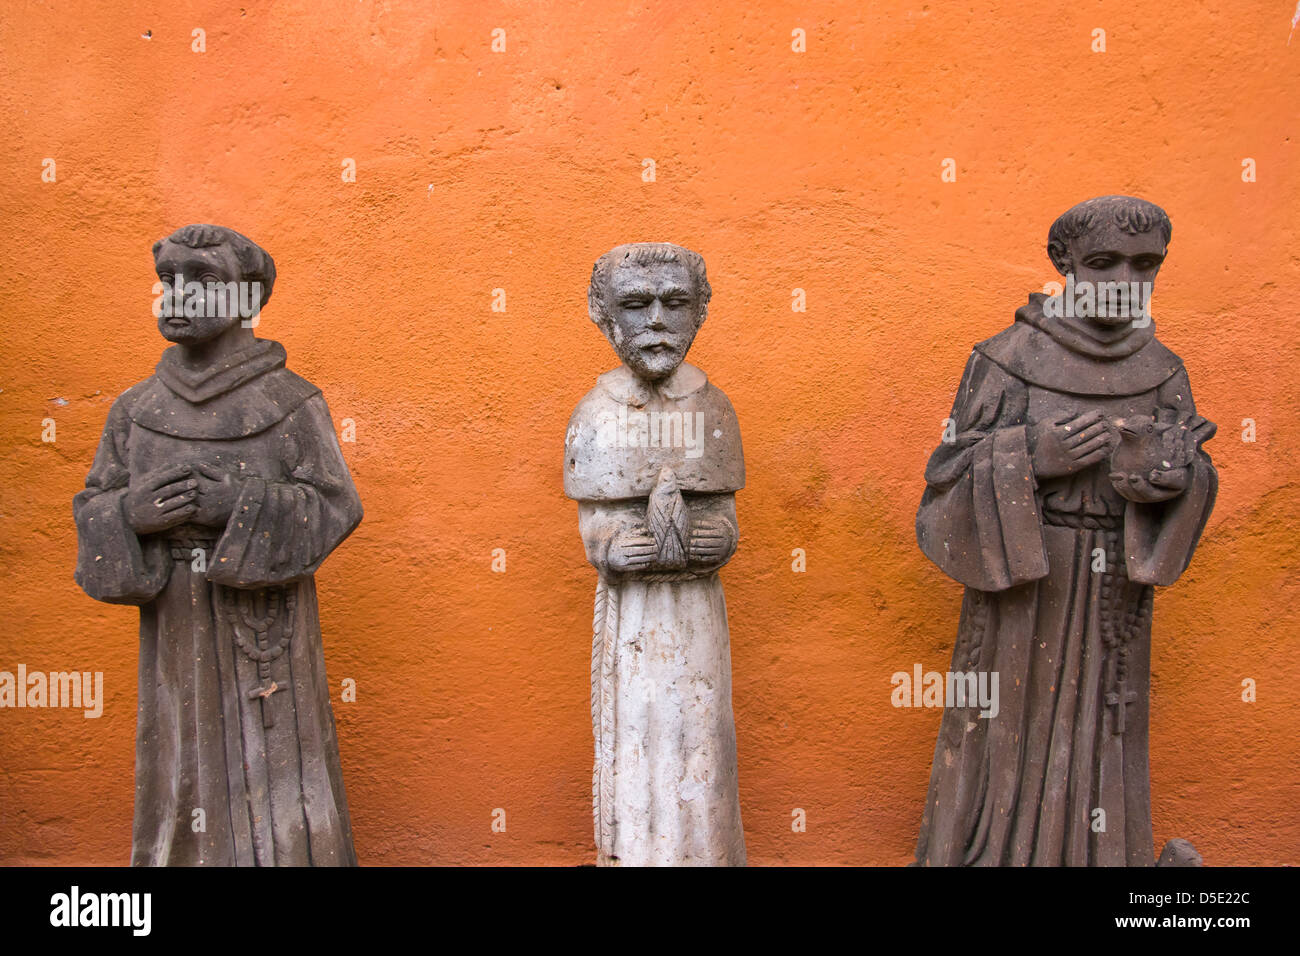 Statues on the street, San Miguel de Allende, Mexico Stock Photo